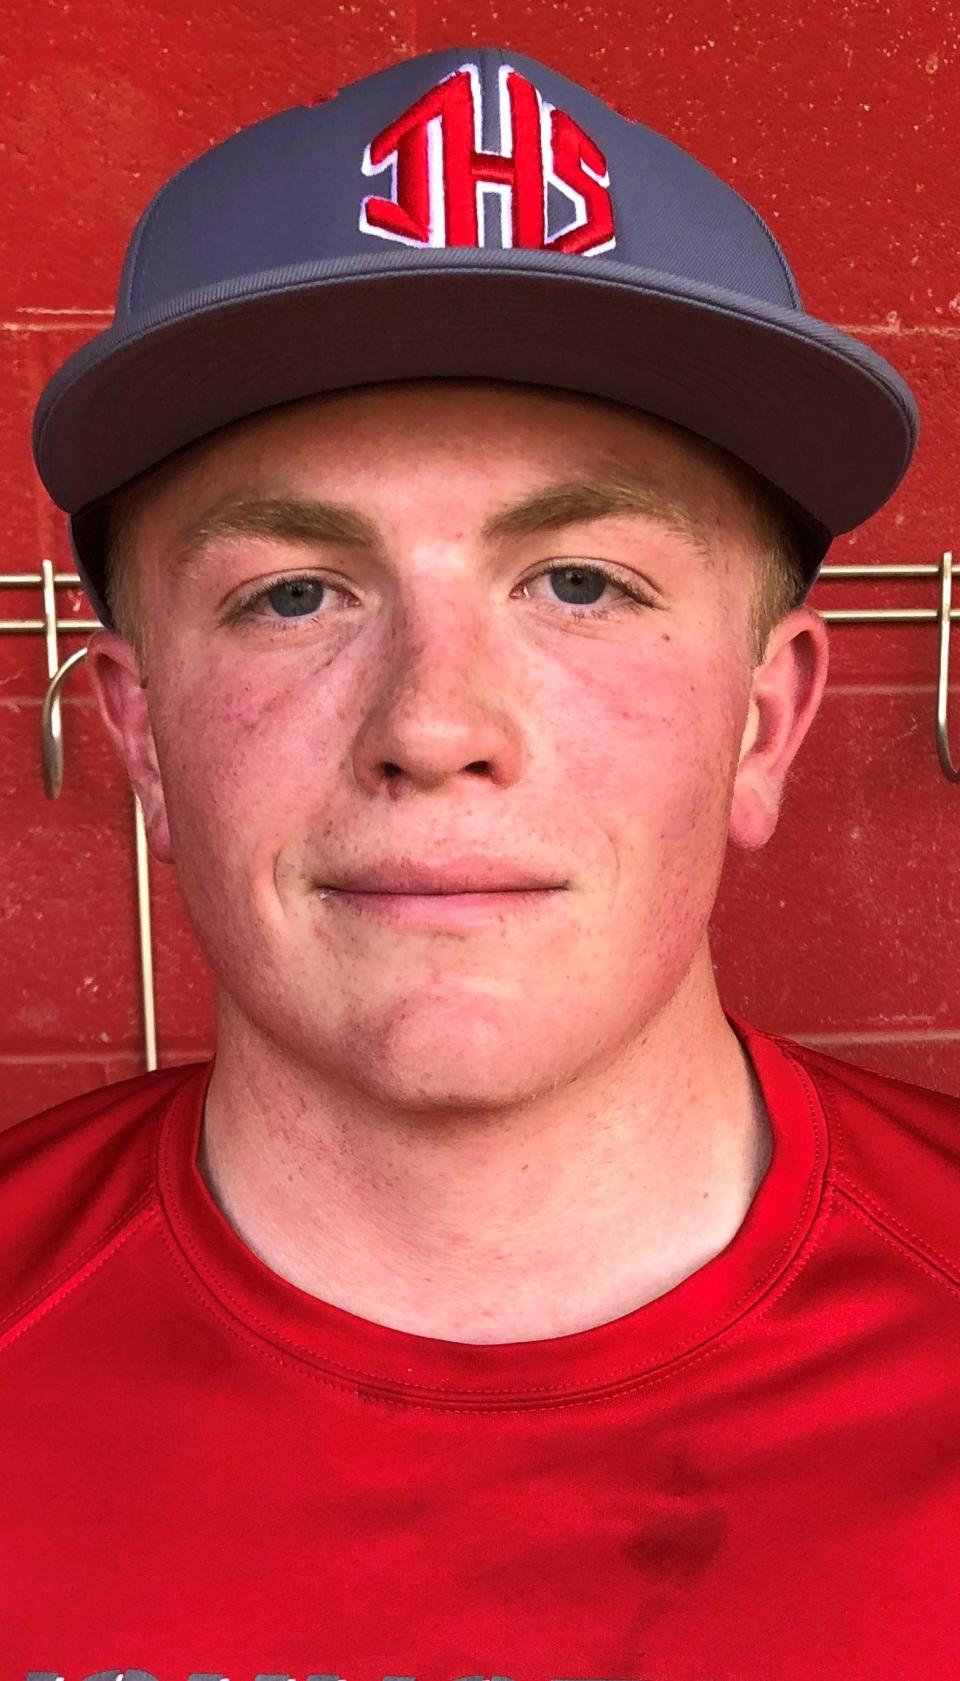 Johnstown junior Clay Bruning pitched a 4-hitter with 13 strikeouts Tuesday, leading the Johnnies to a 3-1 Licking County League crossover win against host Licking Valley.